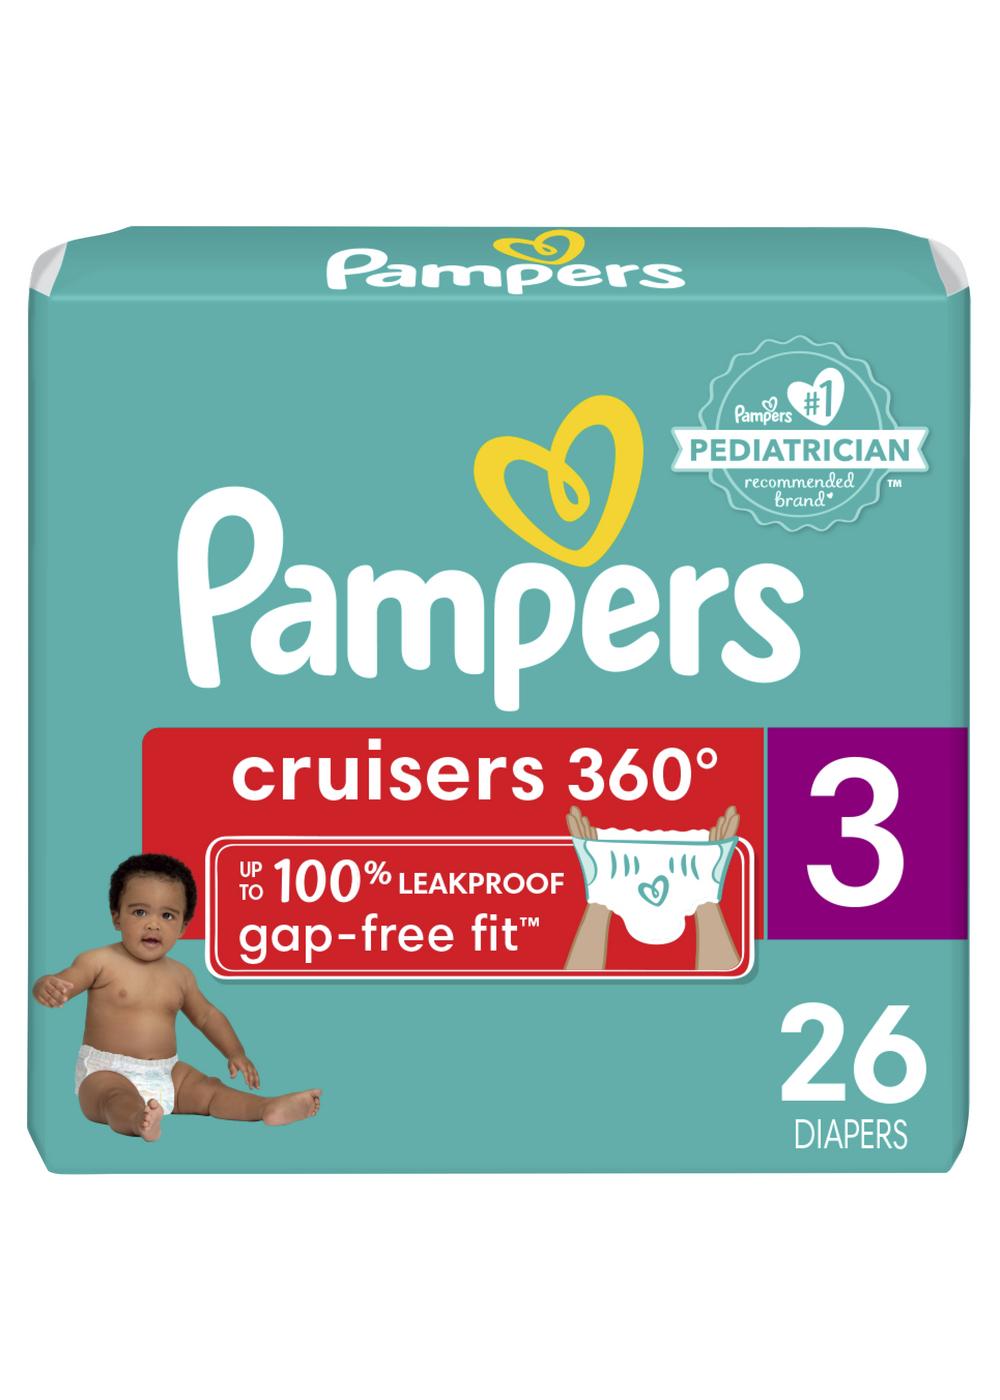 Pampers Cruisers 360 Diapers Size 3; image 1 of 3